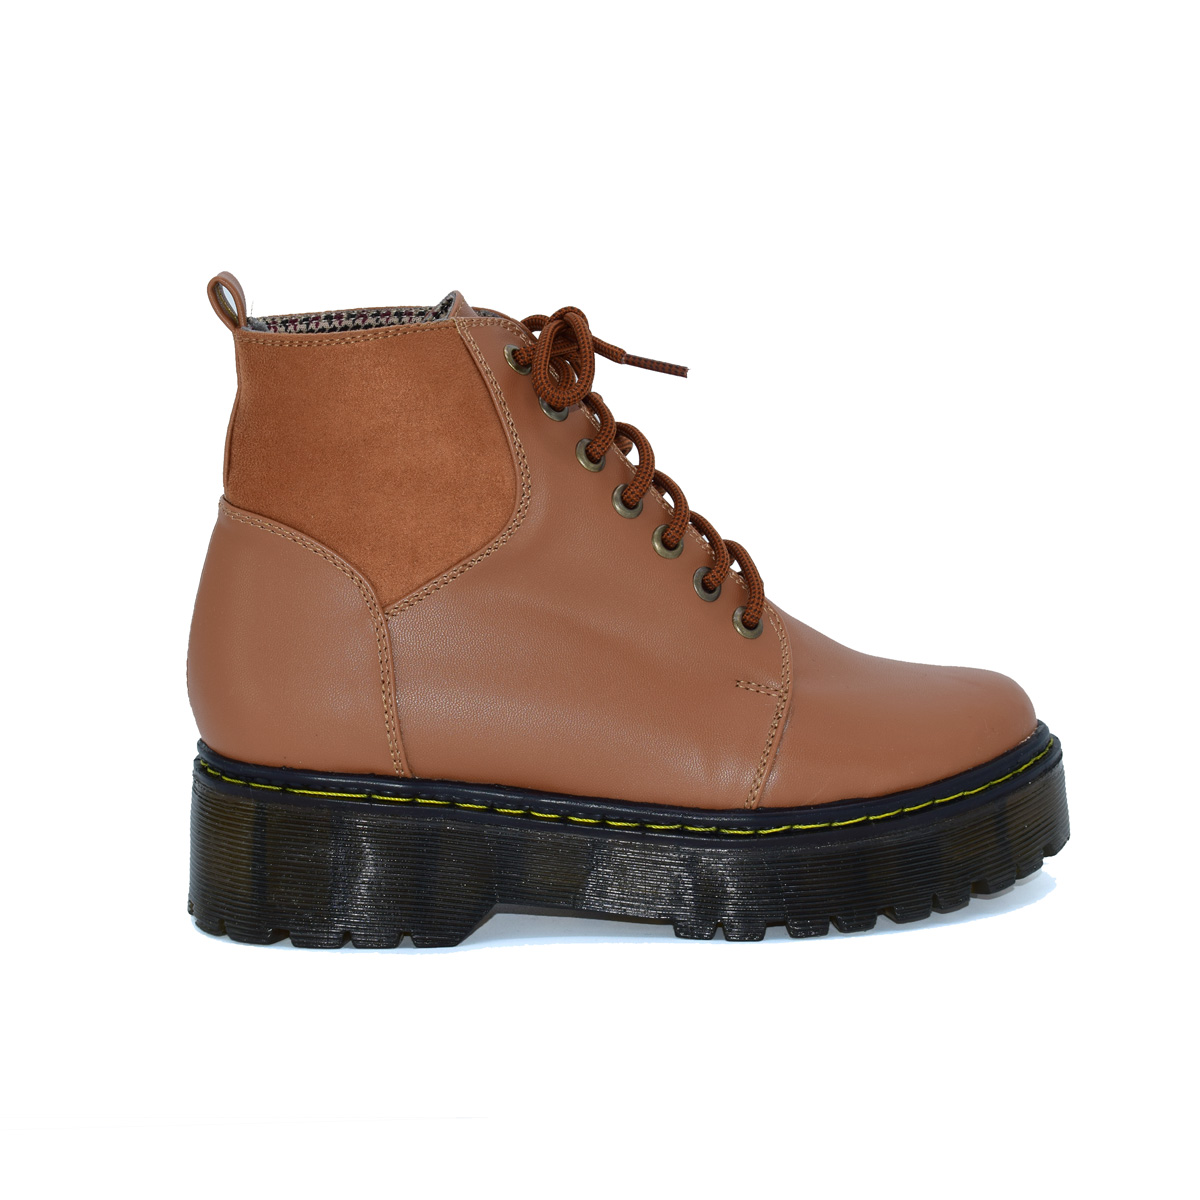 BOTINES ROSSY RY003 CAMELL